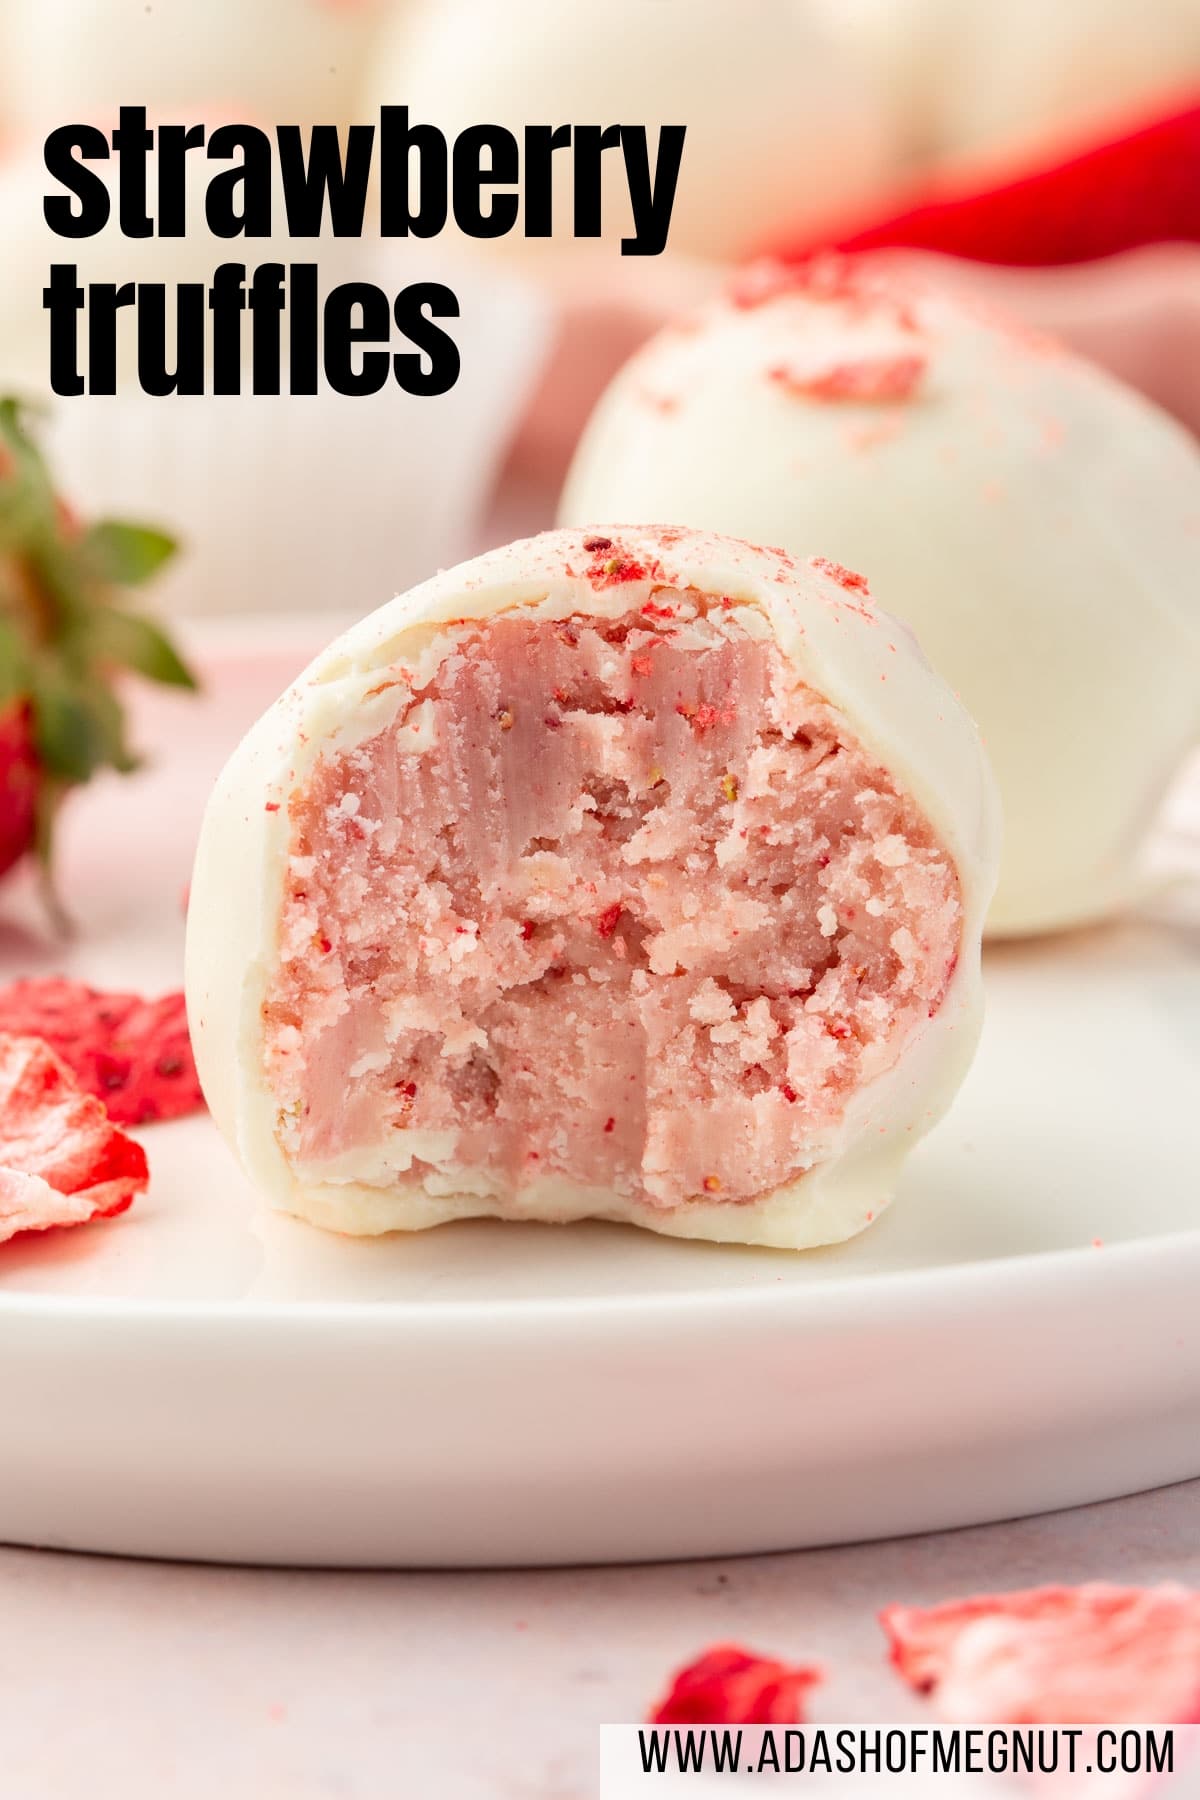 A single white chocolate strawberry truffle on a plate with more truffles in the background.